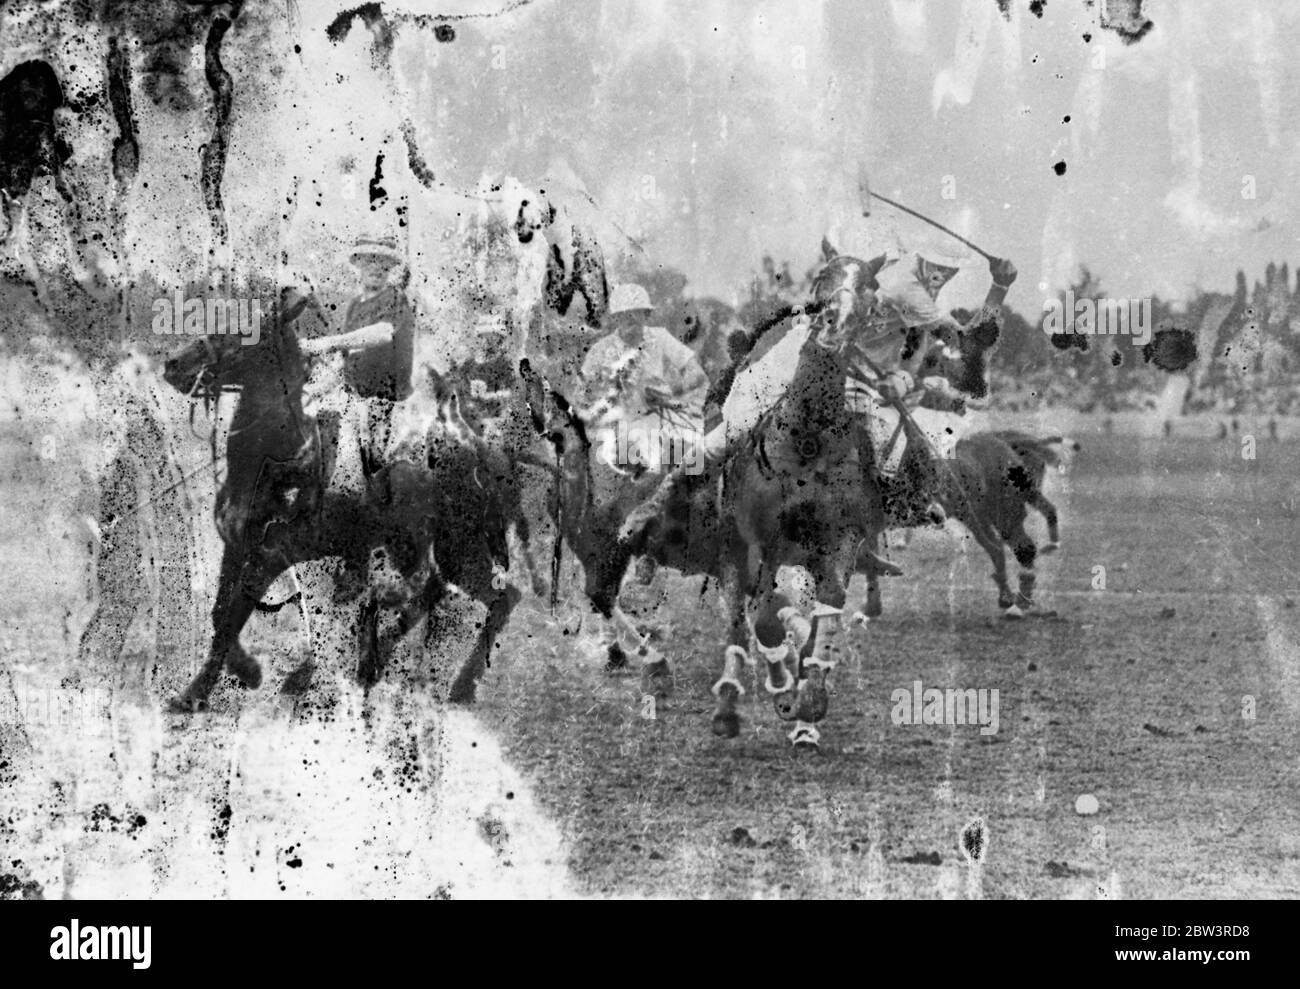 Argentinas scores smashing victory over Britain to win Olympic highlight polo championships . Defeating vibration by 11 goals to nil, Argentina became polo champions in Olympic Games in Berlin . Photo shows, players racing for the ball in the match between Britain and Argentina in Berlin . 8 August 1936 Stock Photo